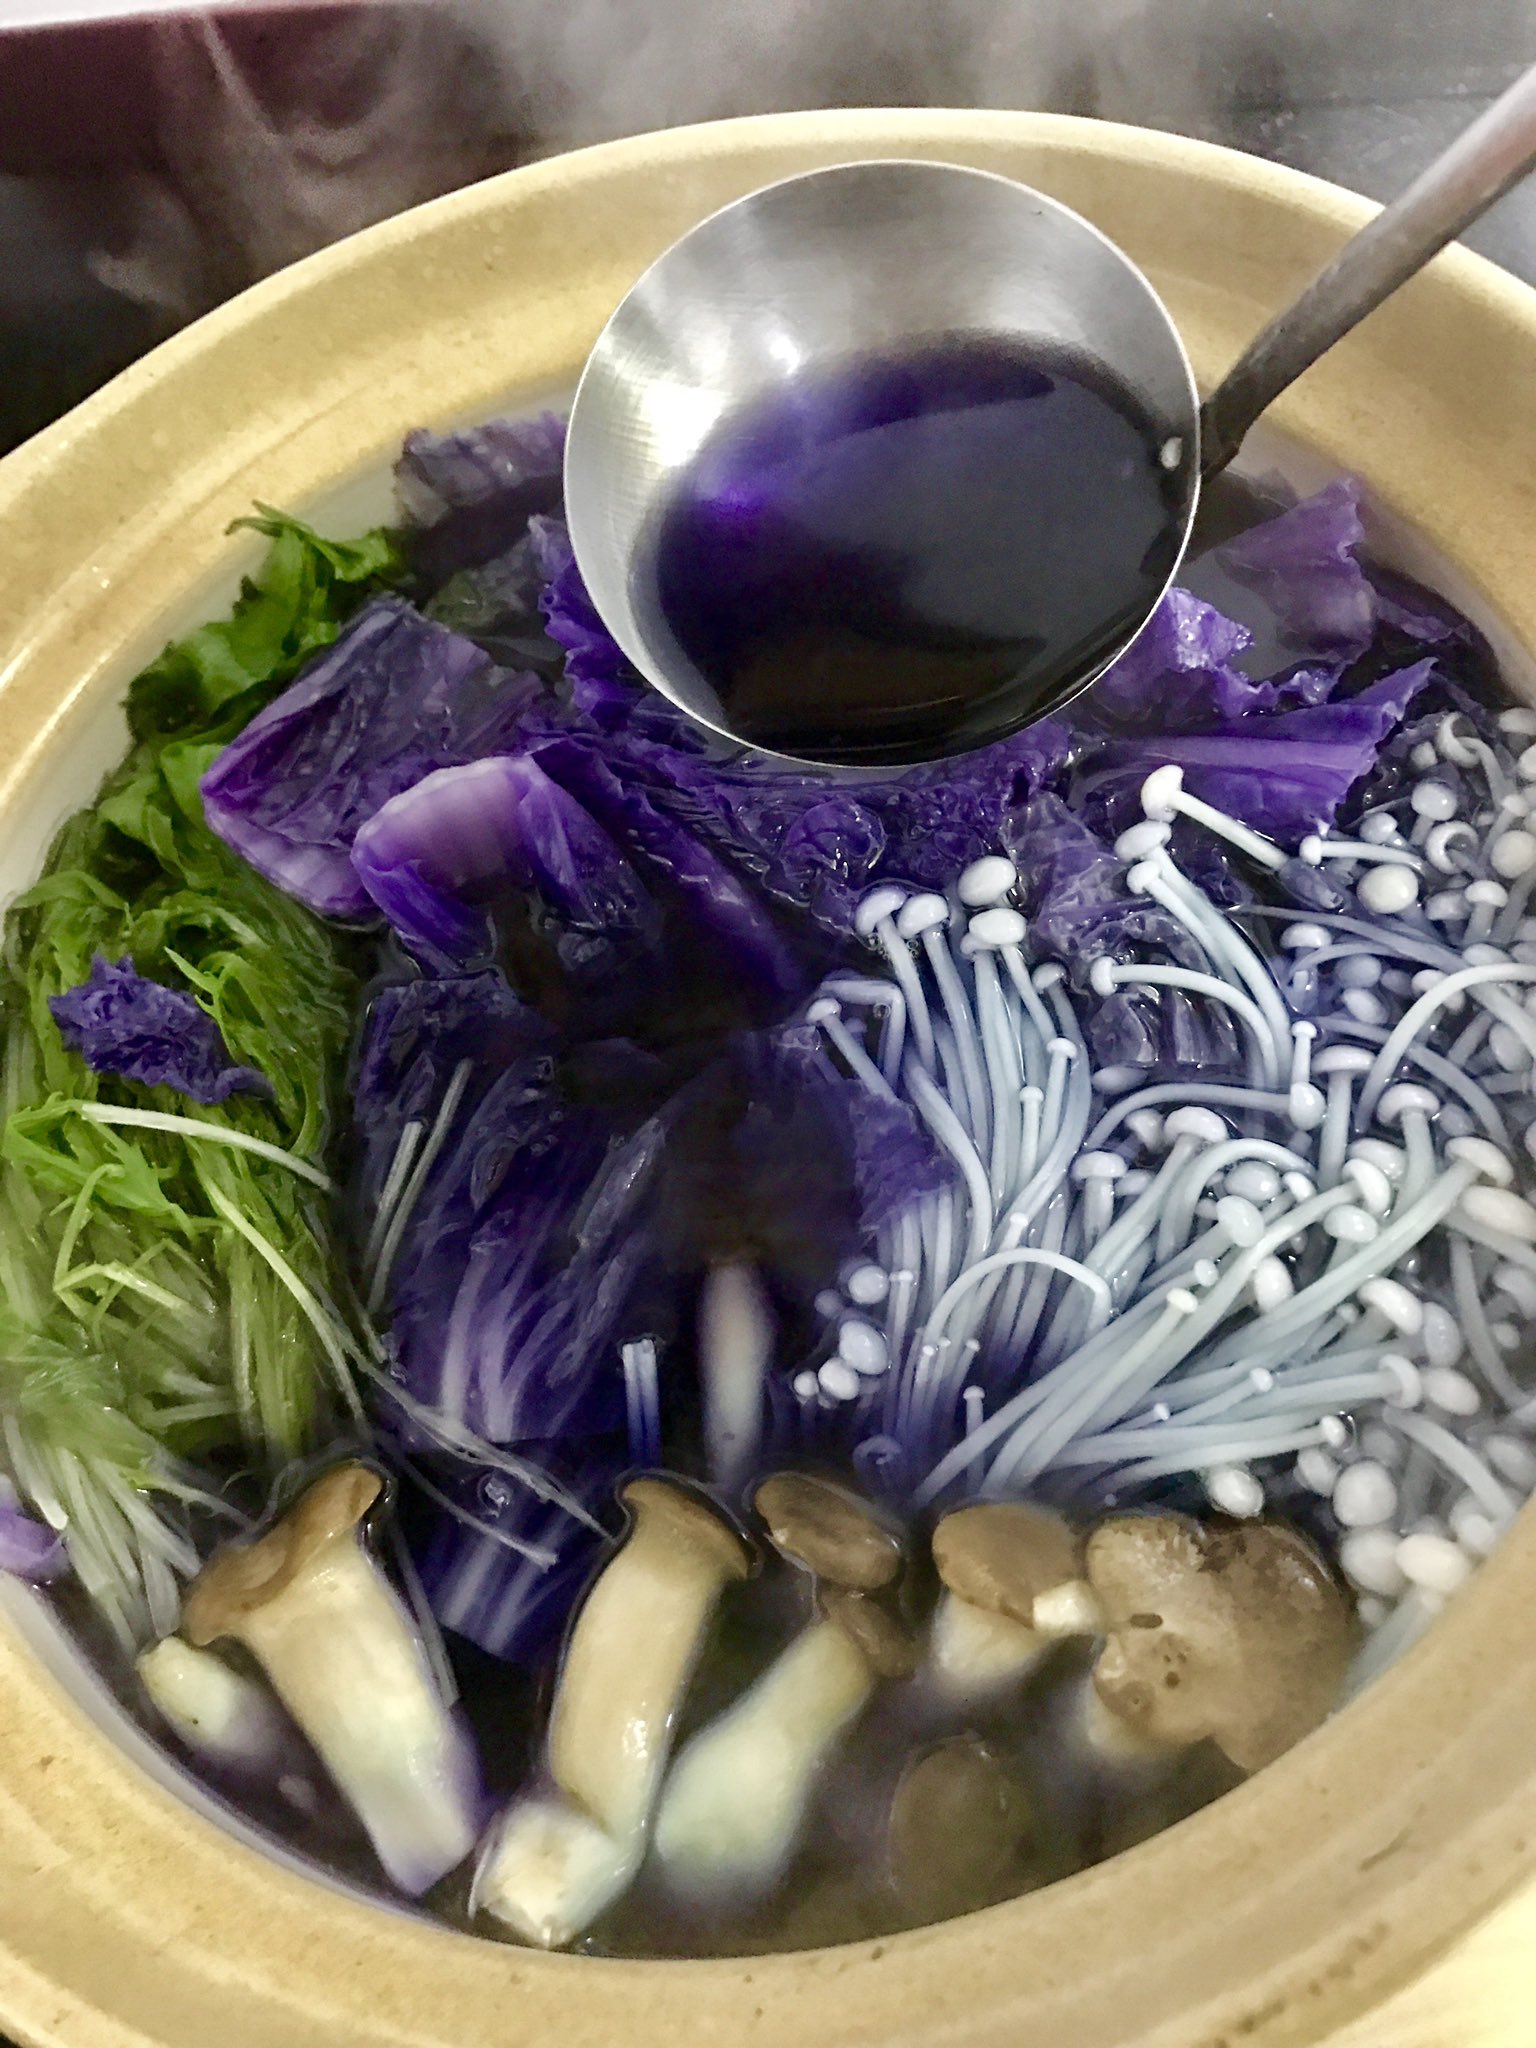 Should I put it in the purple cabbage nabe?